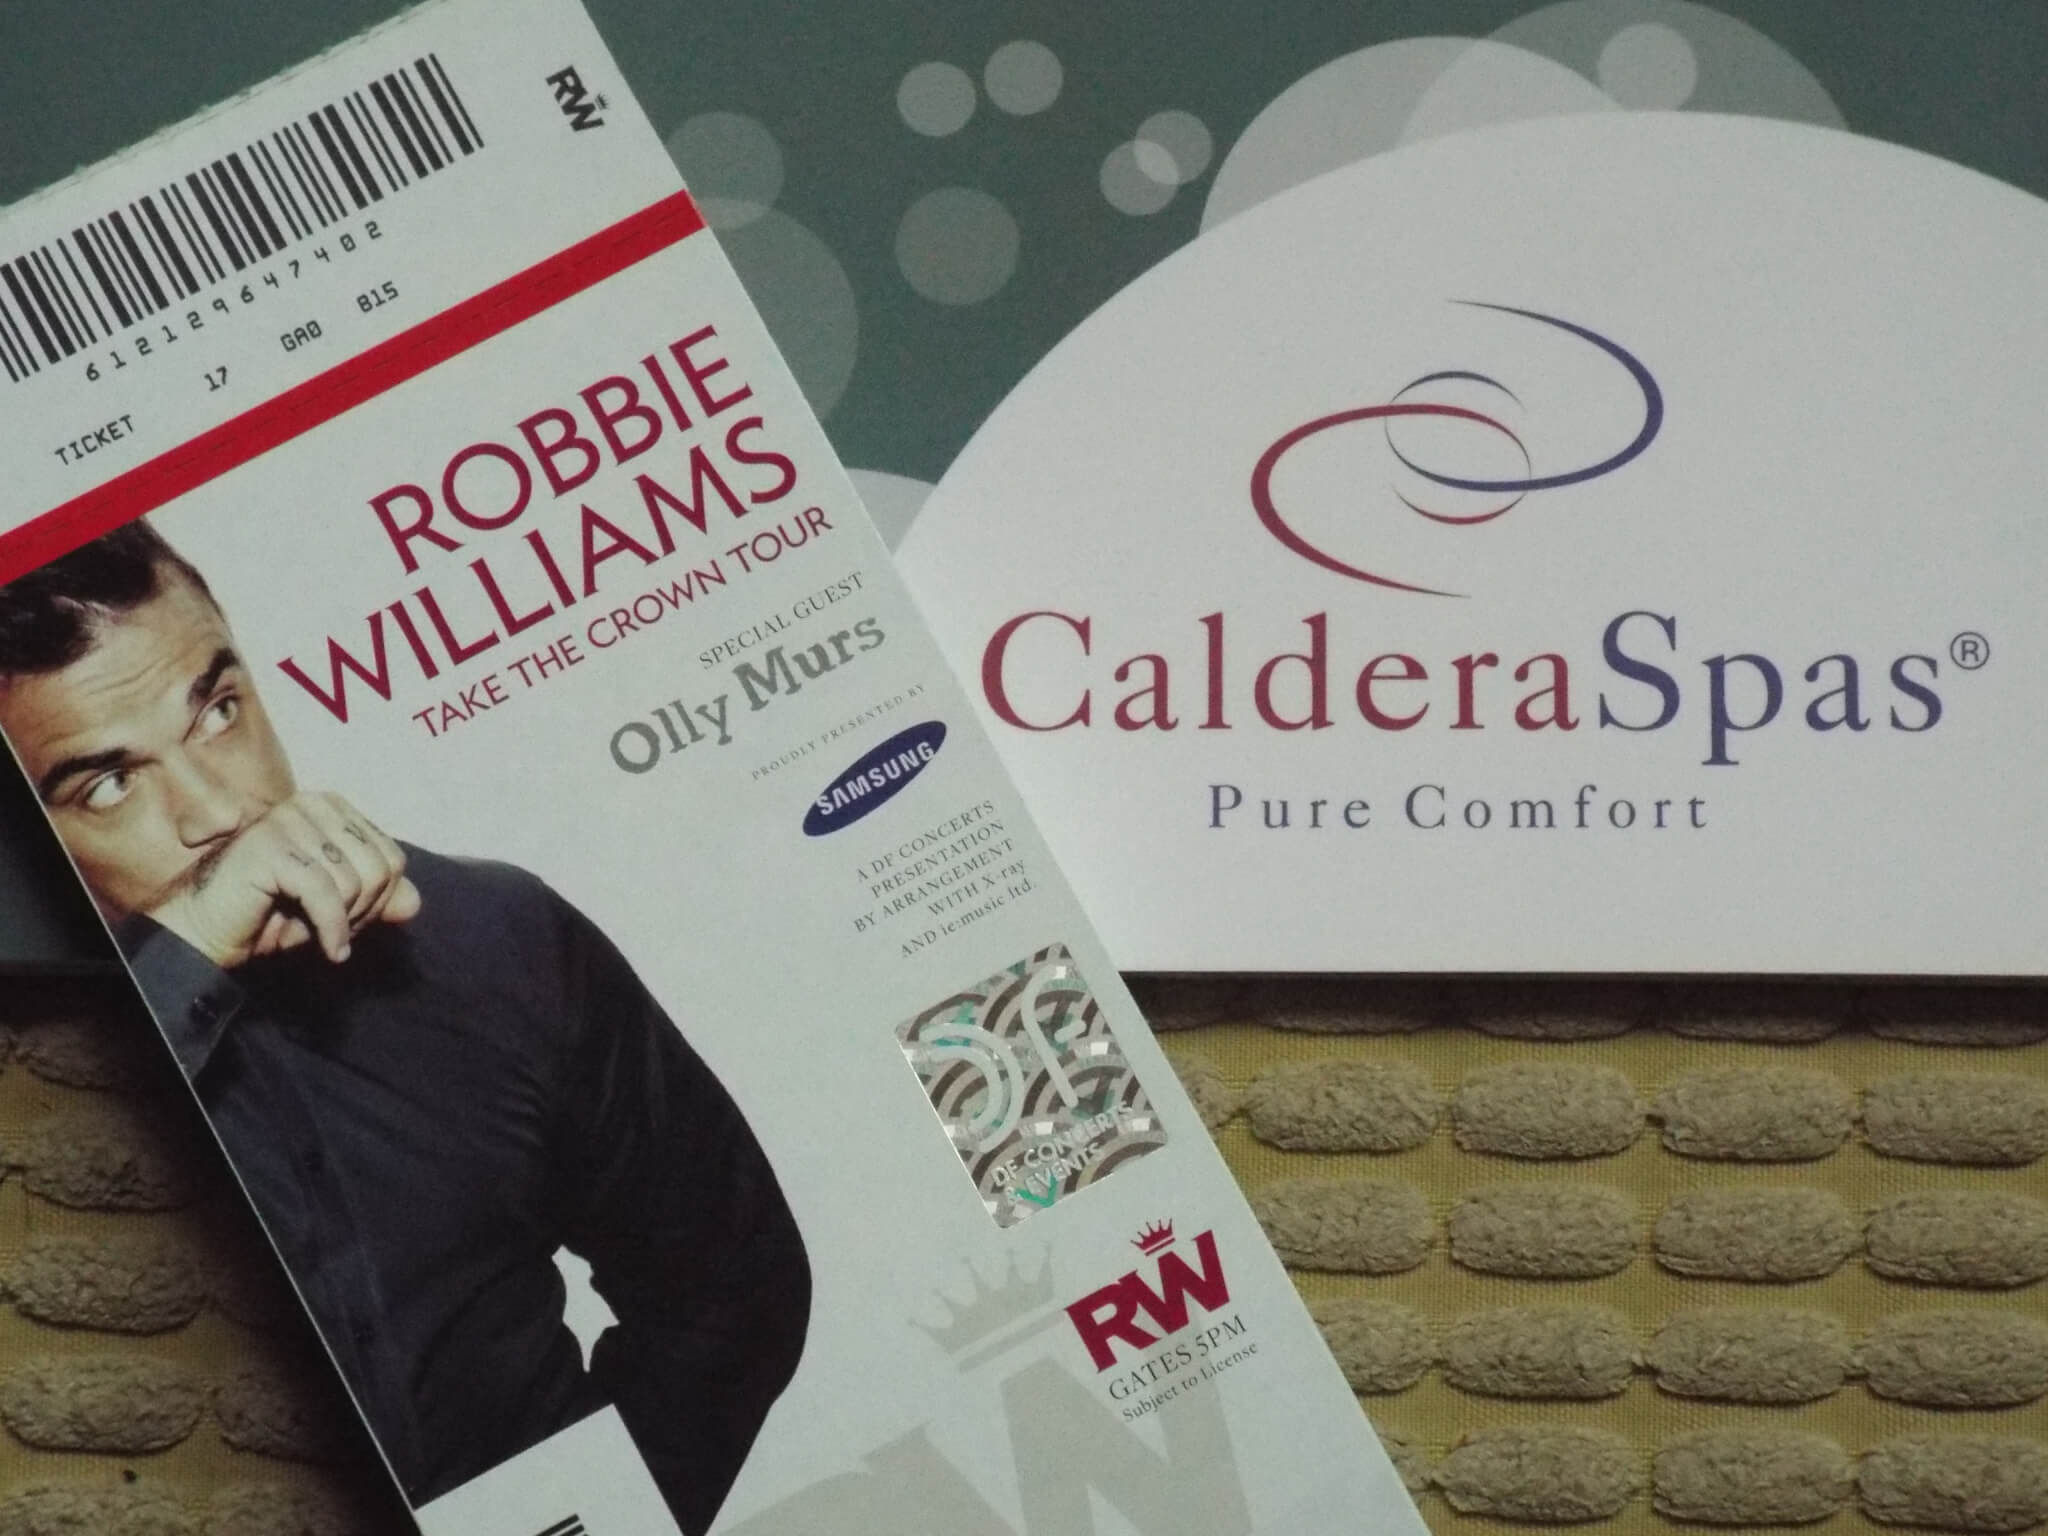 Robbie Williams Tickets Up For Grabs